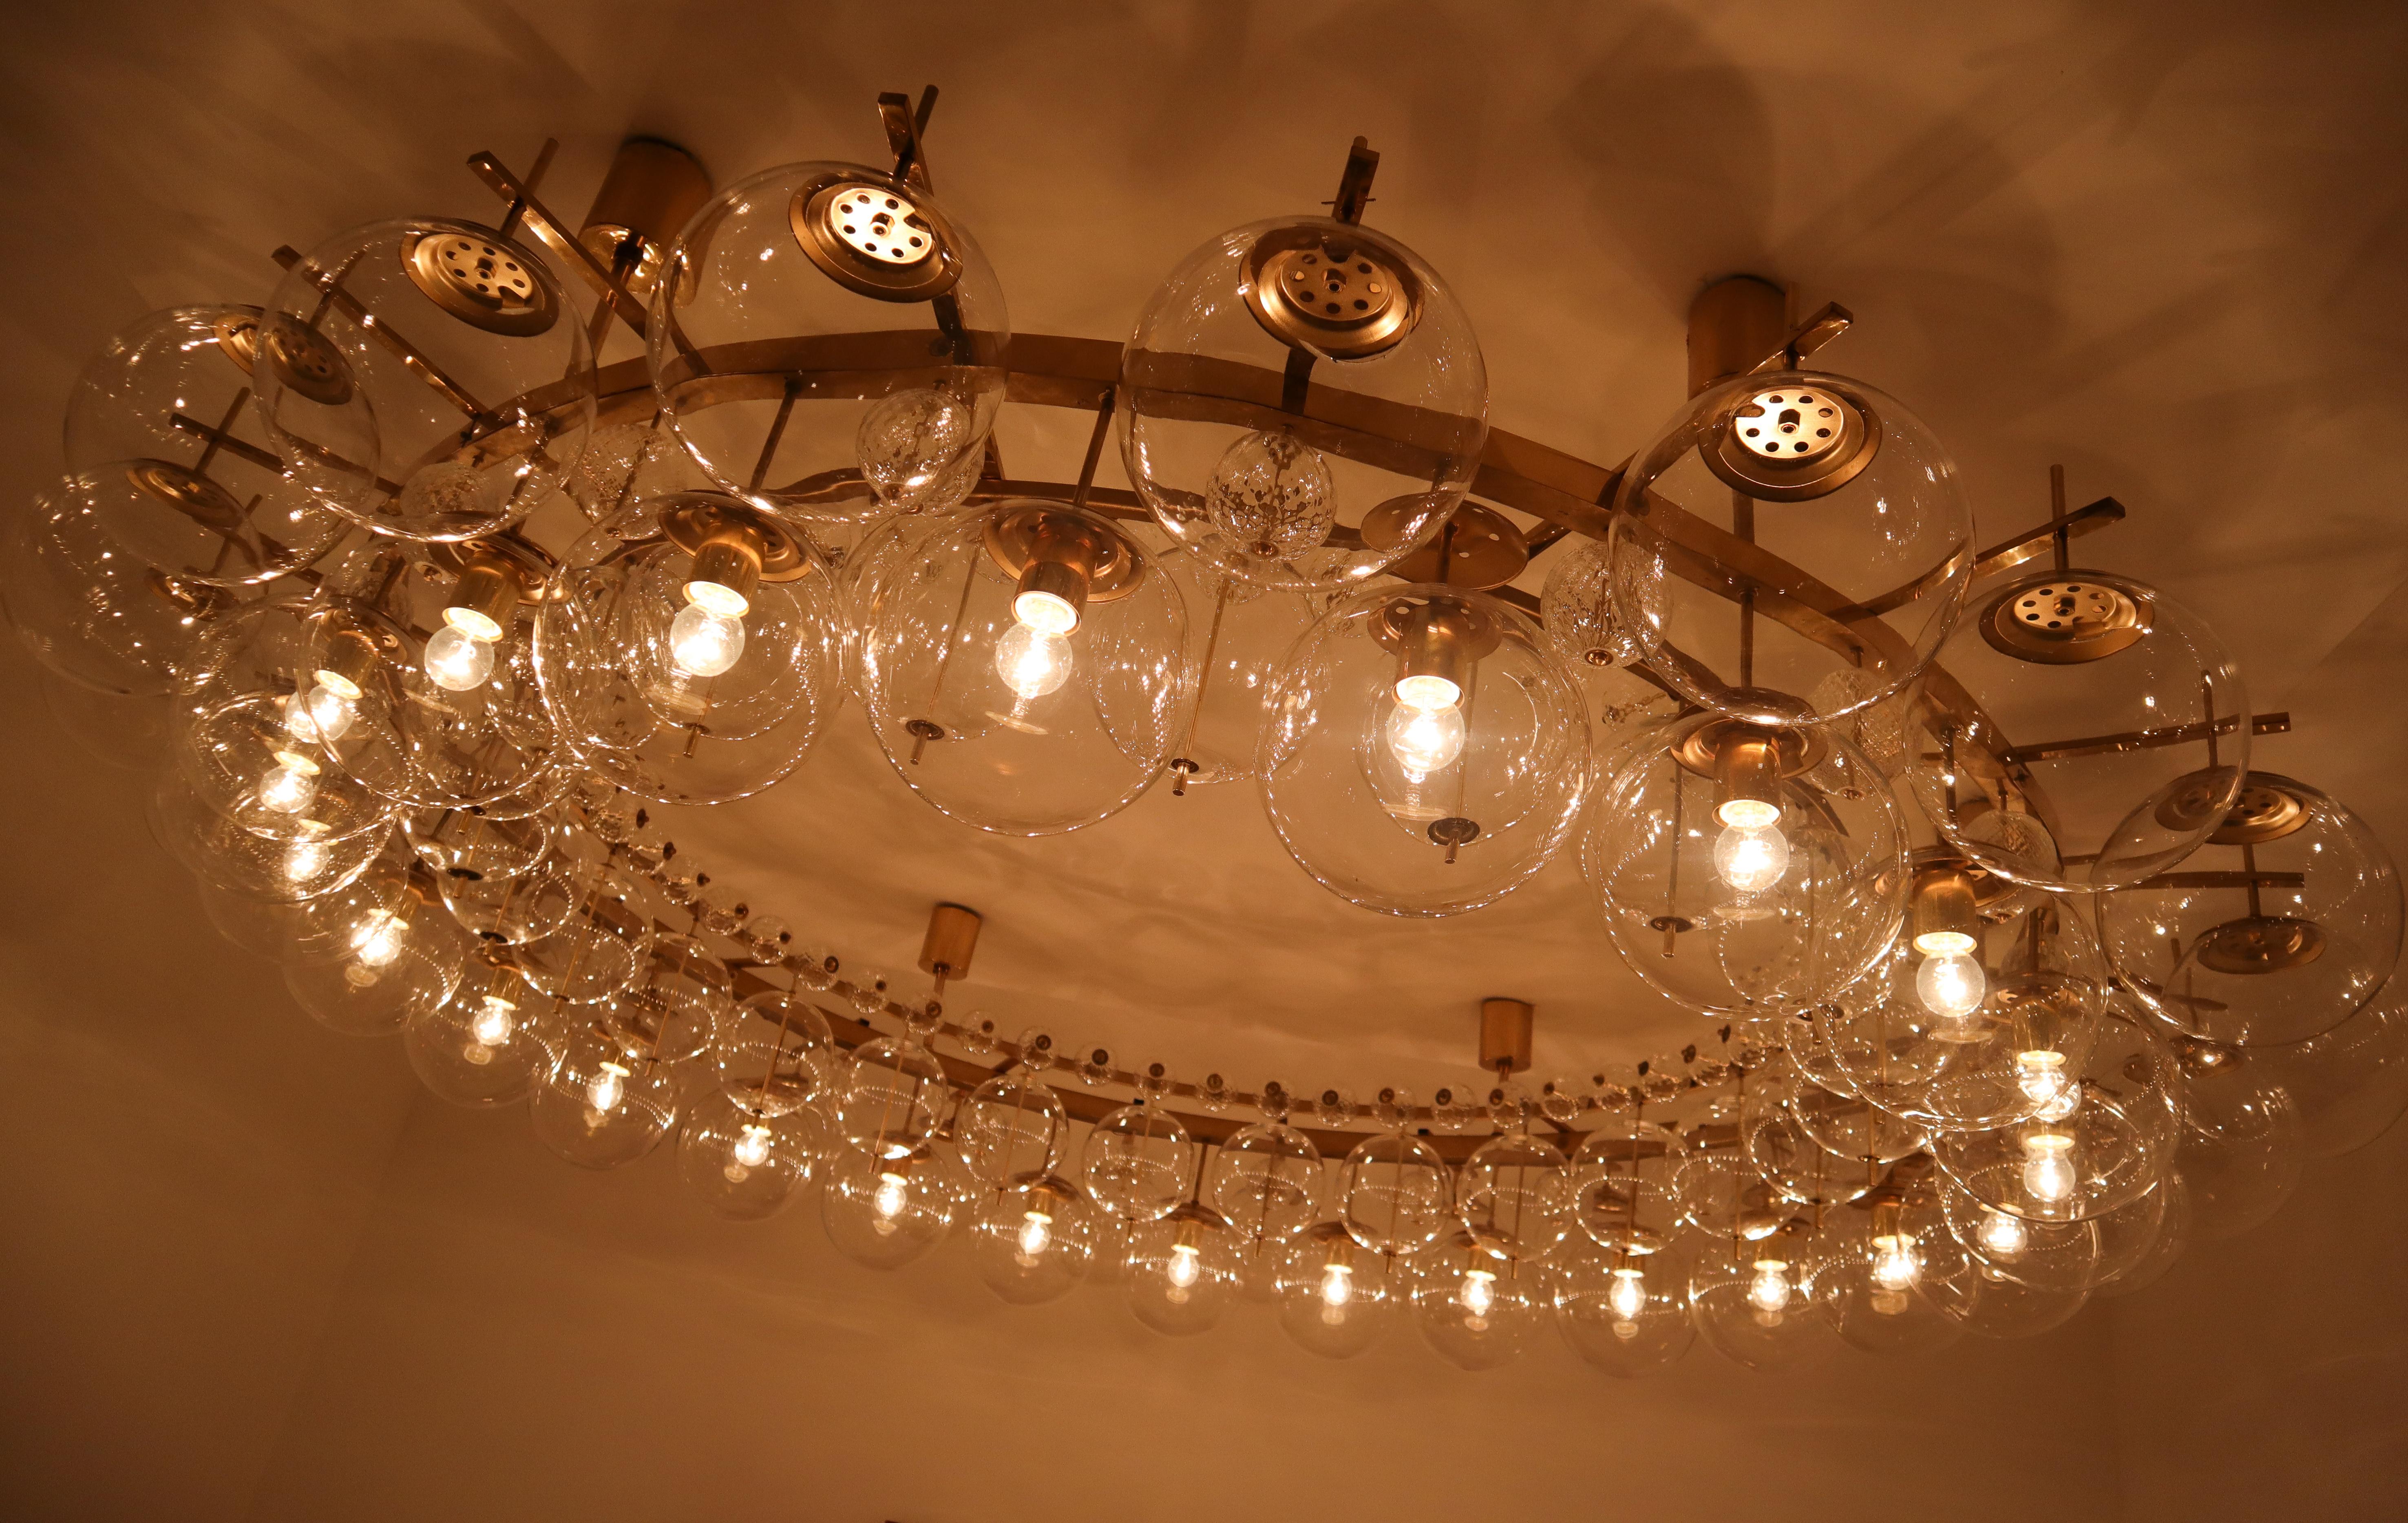 Two Extremely Large Hotel Chandeliers with Brass Fixture and Hand-Blowed Glass 7